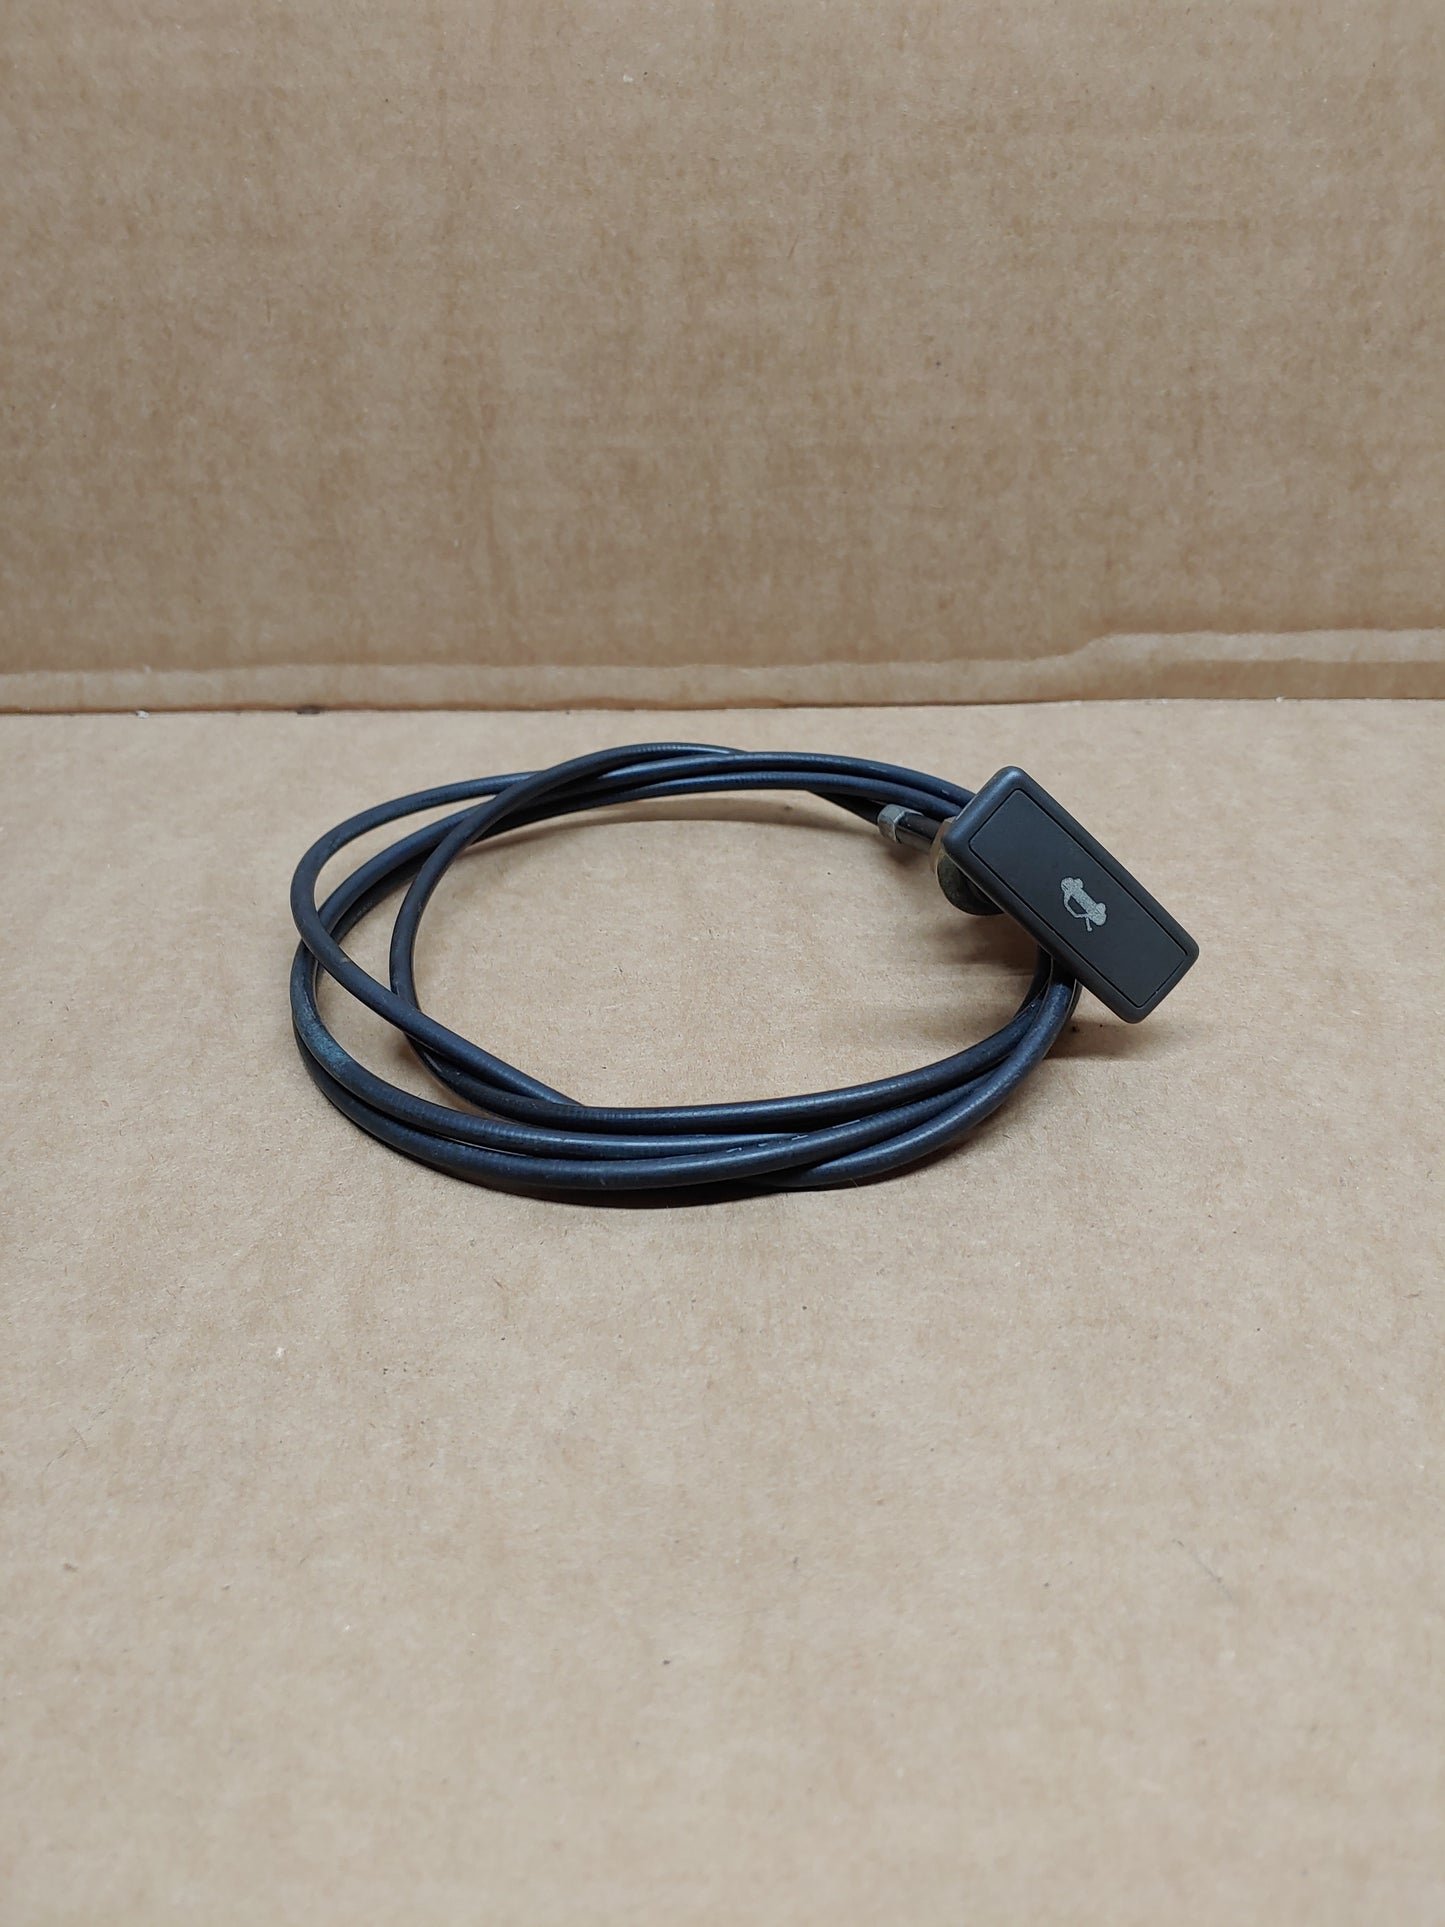 1986-1991 Mazda Rx7 FC Hood Release Cable